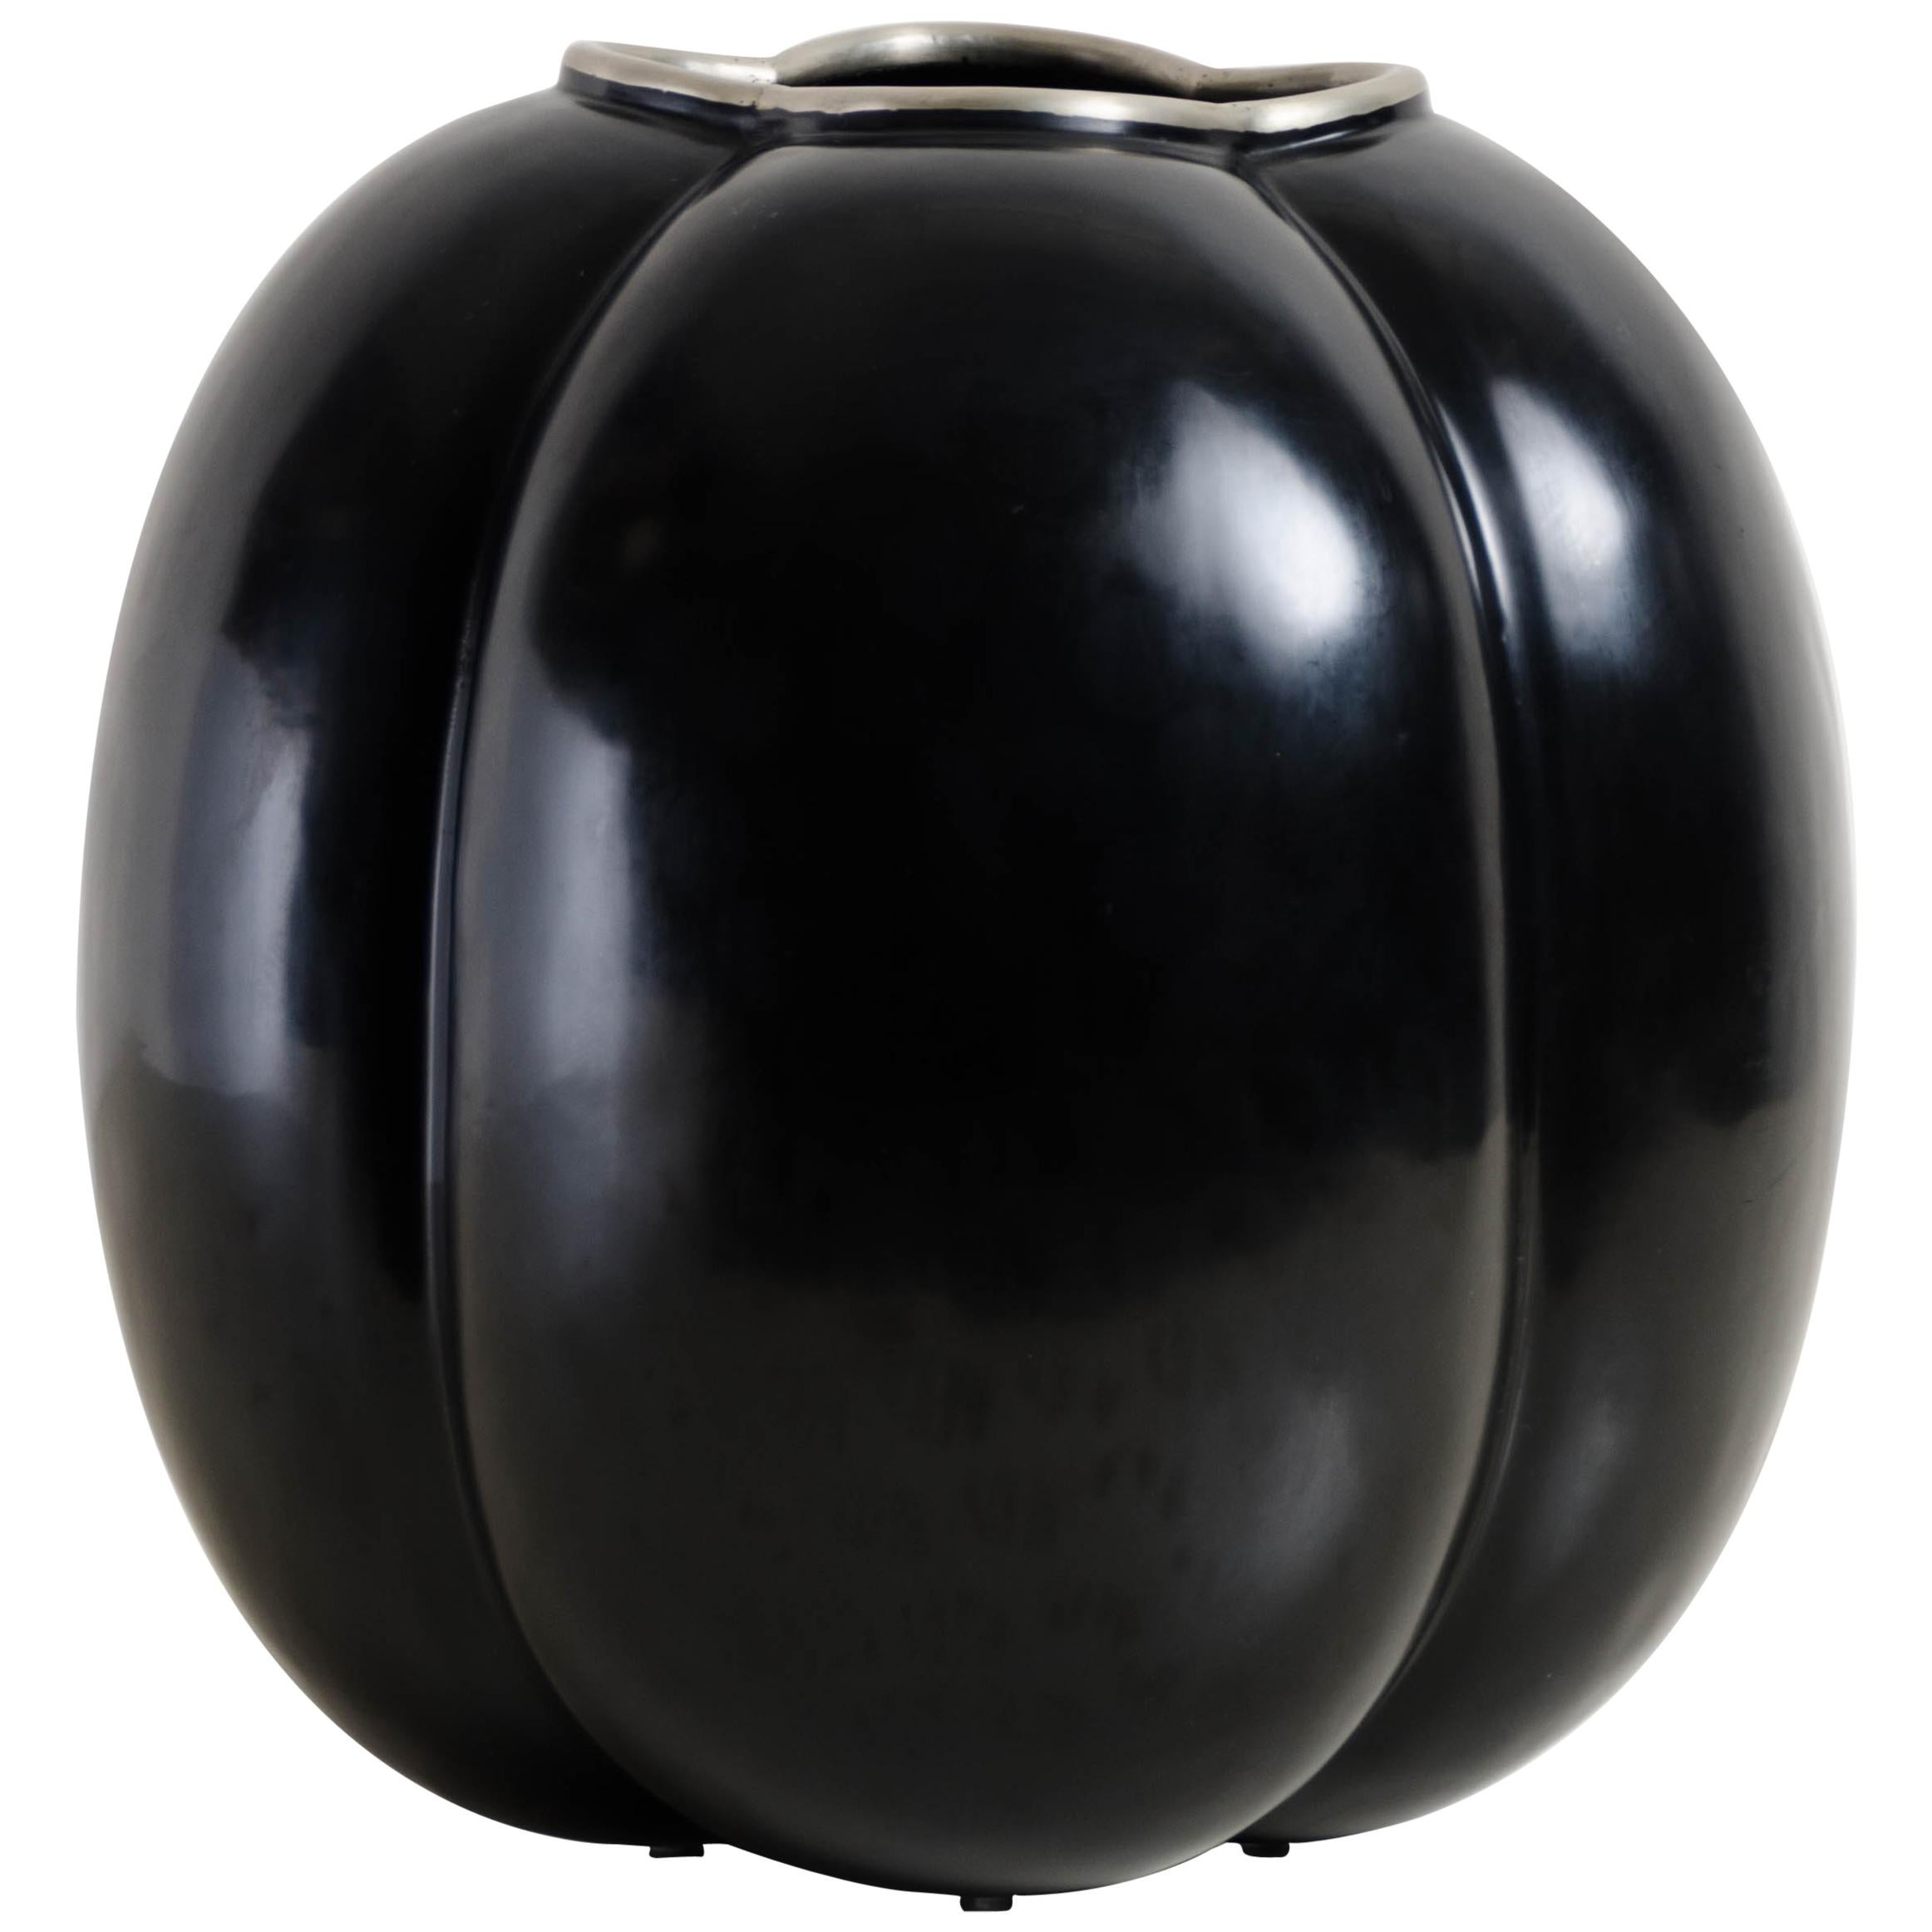 High Tang Vase, Black Lacquer by Robert Kuo, Handmade, Limited Edition